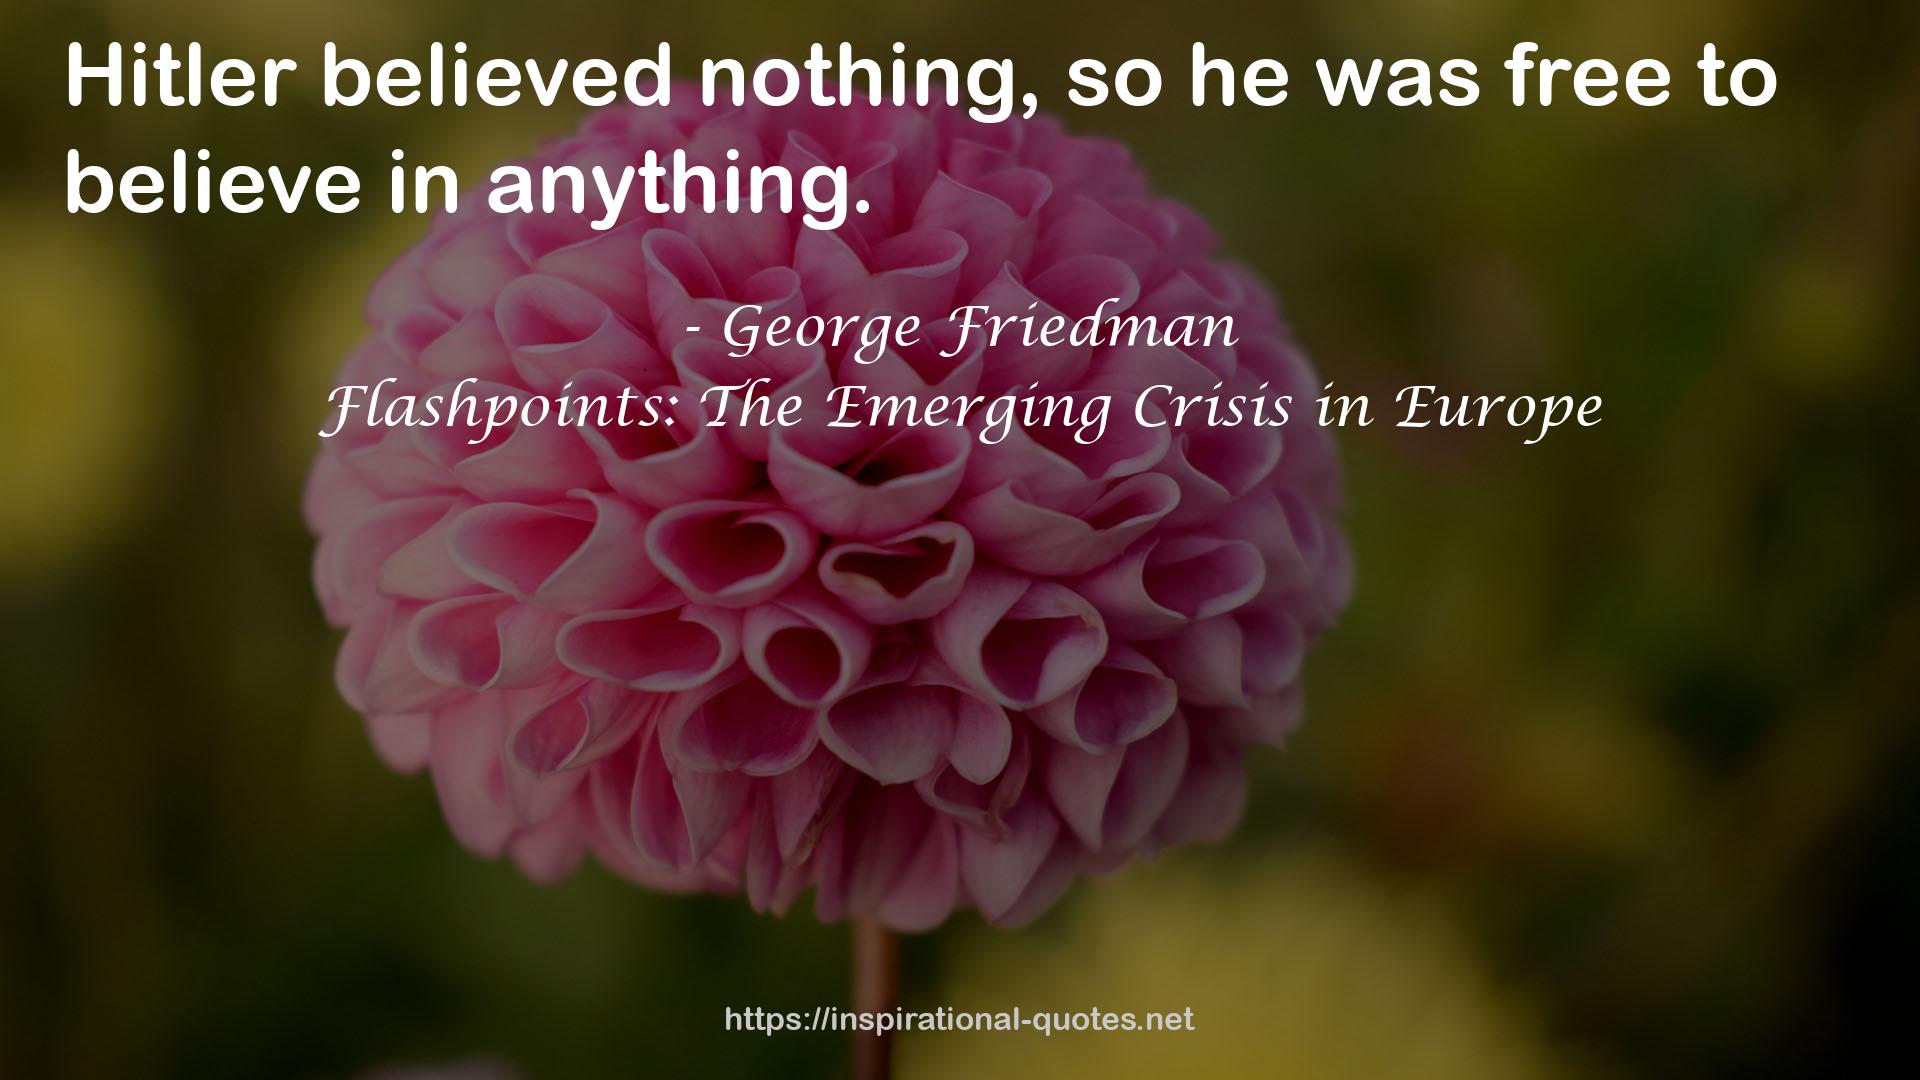 Flashpoints: The Emerging Crisis in Europe QUOTES